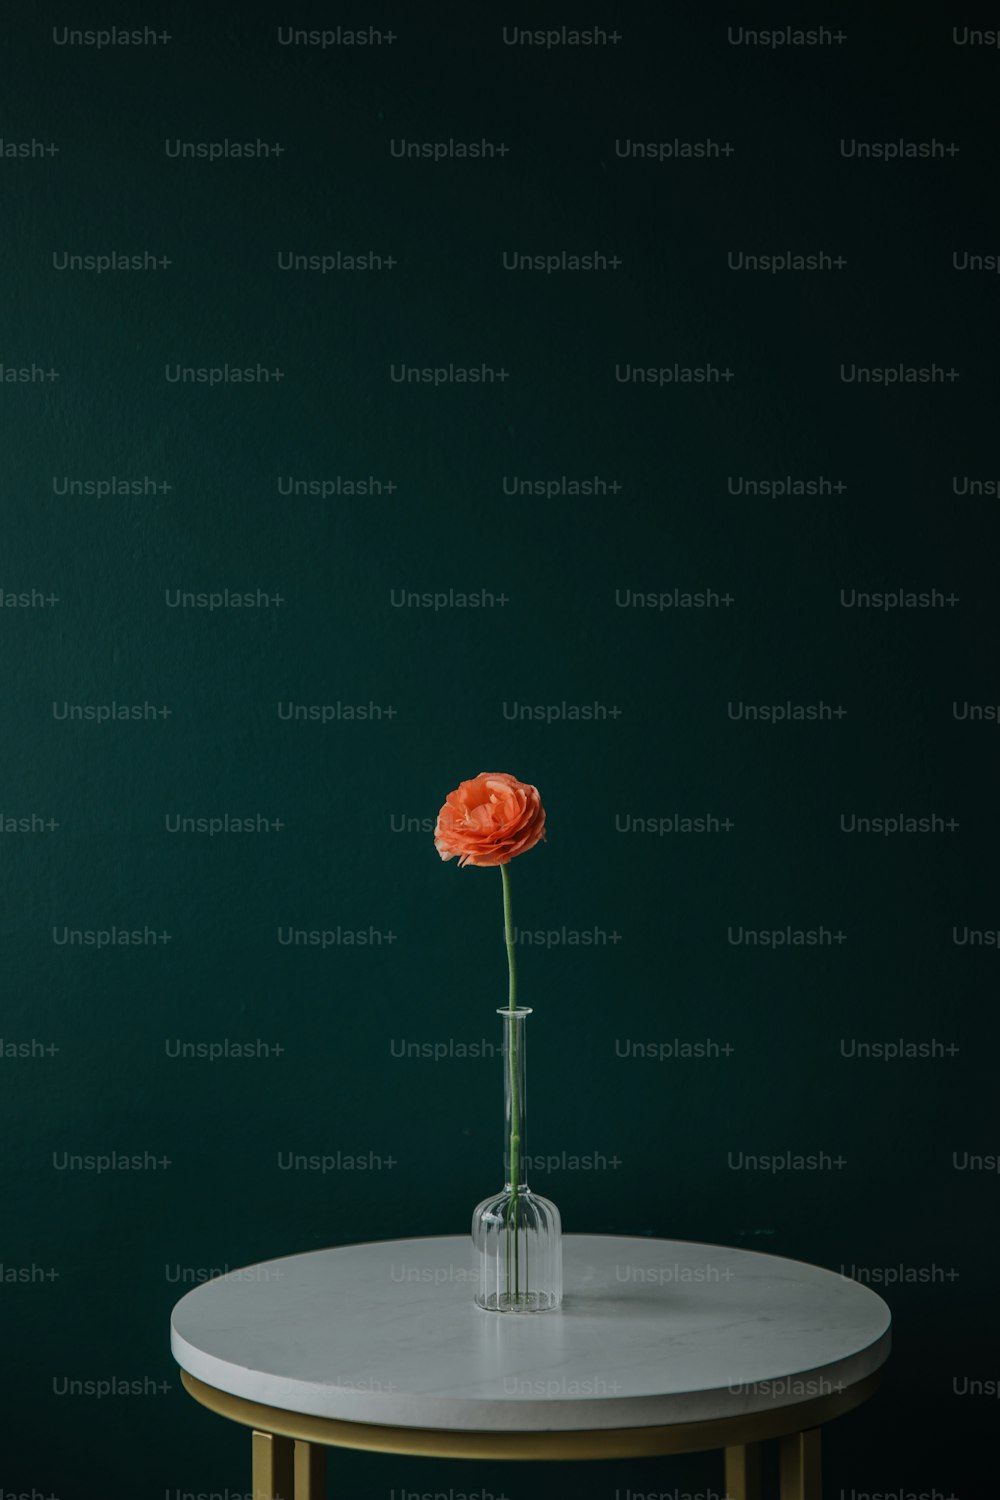 a single flower in a vase on a table